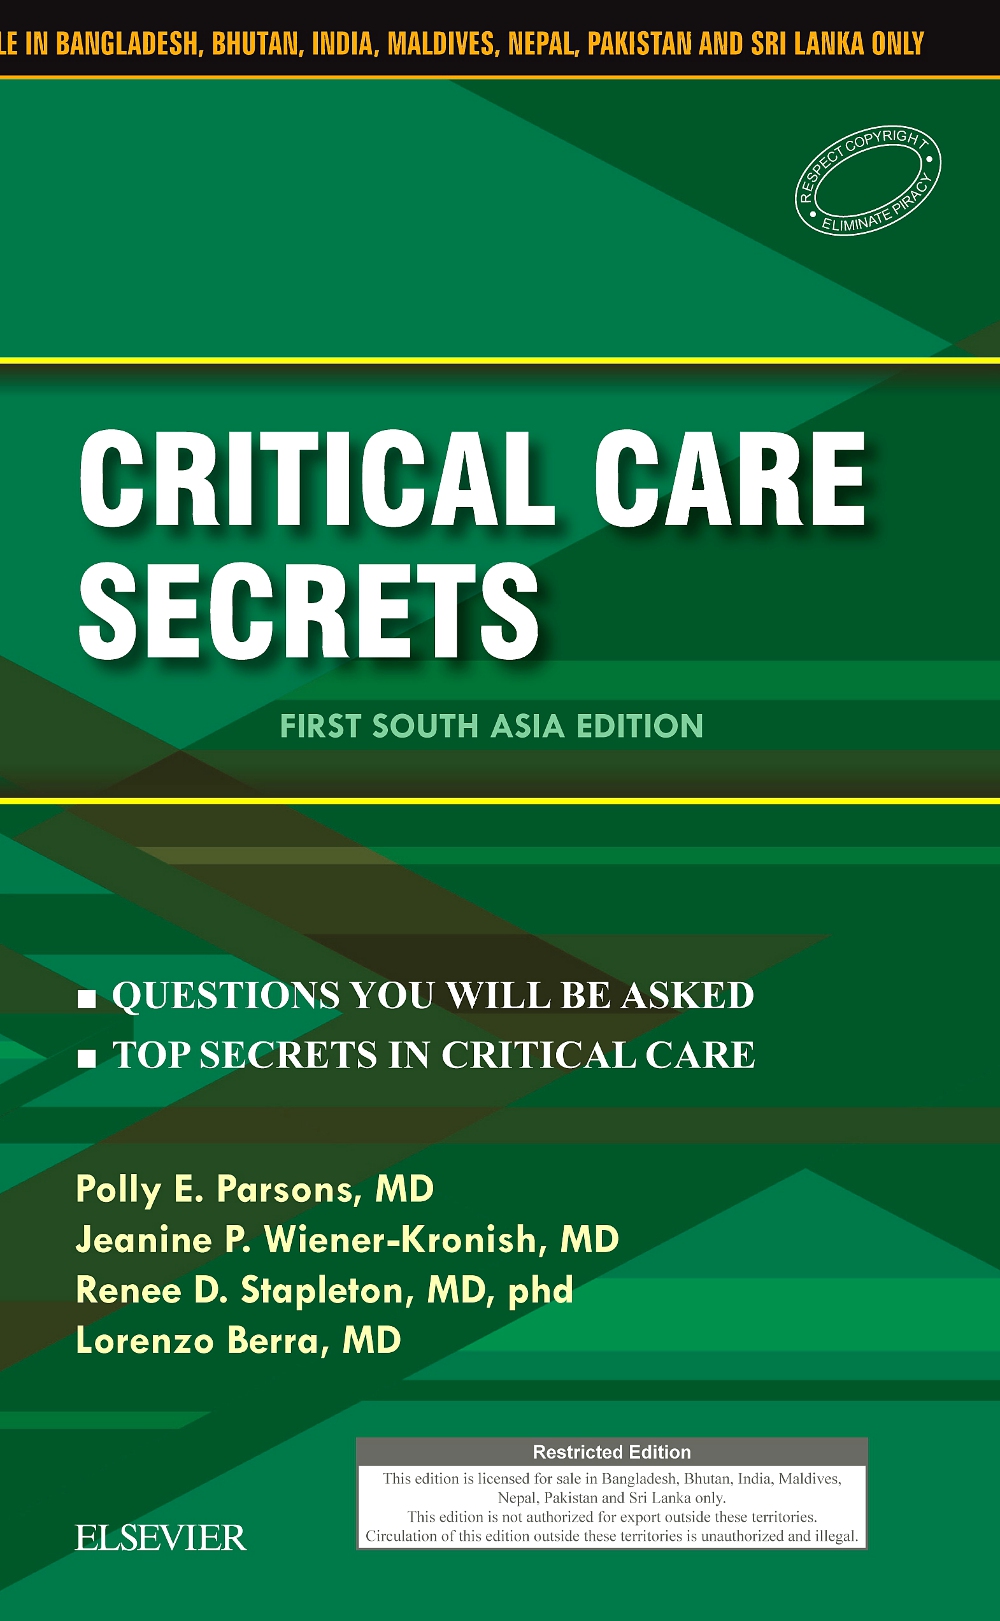 Critical Care Secrets: First South Asia Edition